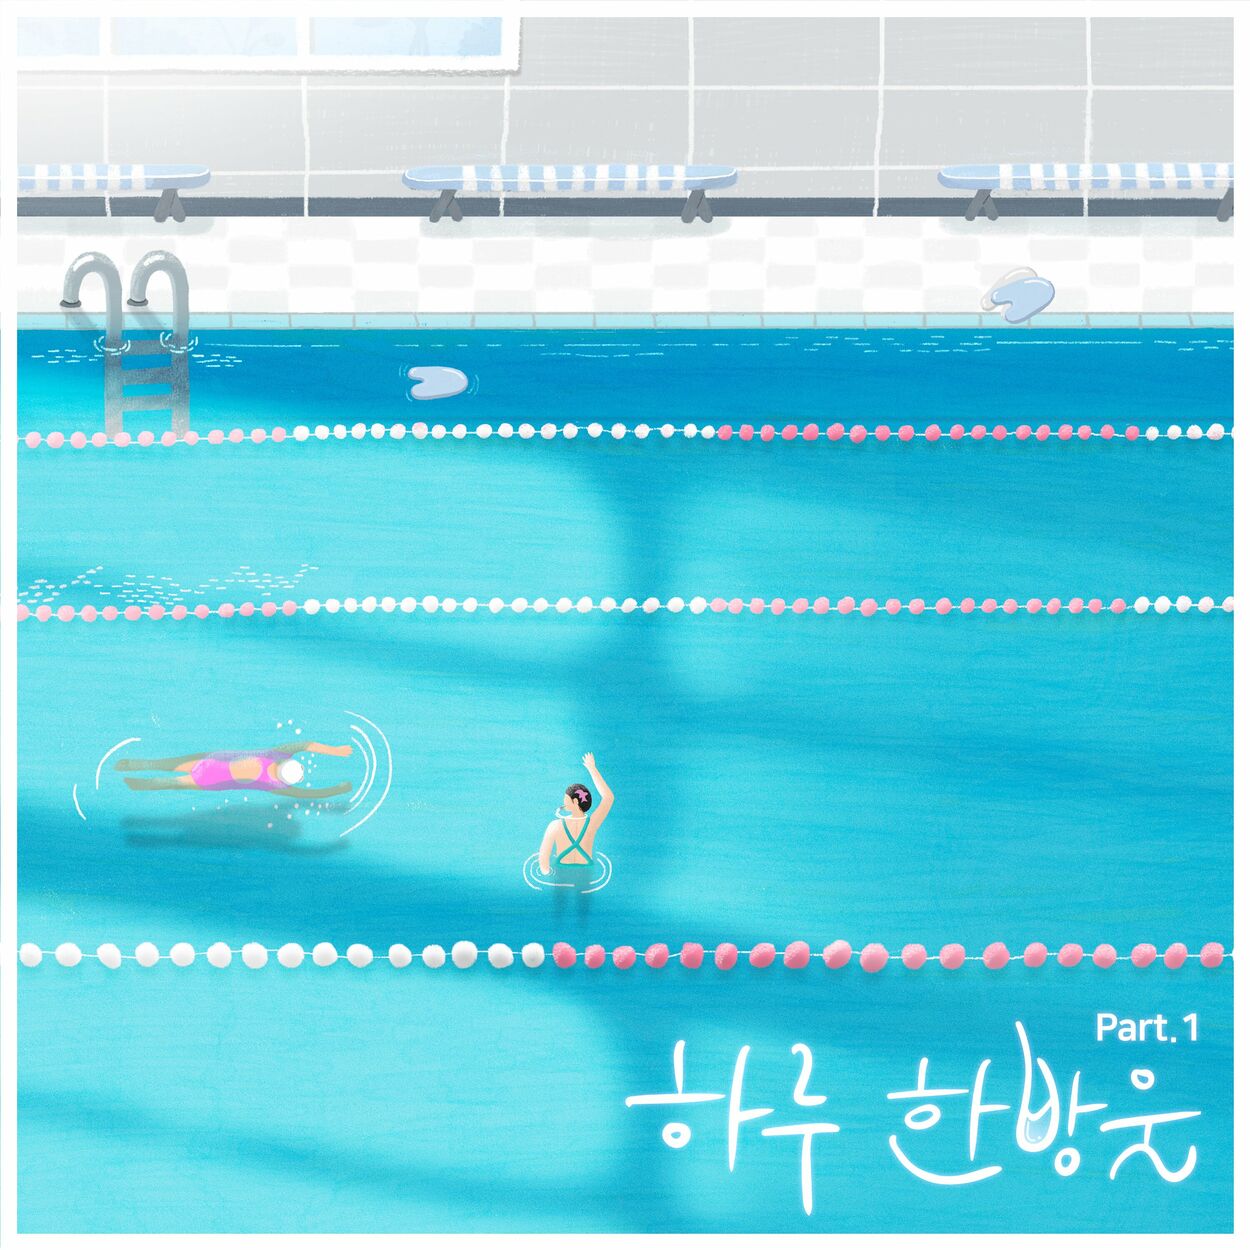 Jukjae, Jung In, Kim Suyoung – One drop a day (Original Soundtrack), Pt. 1